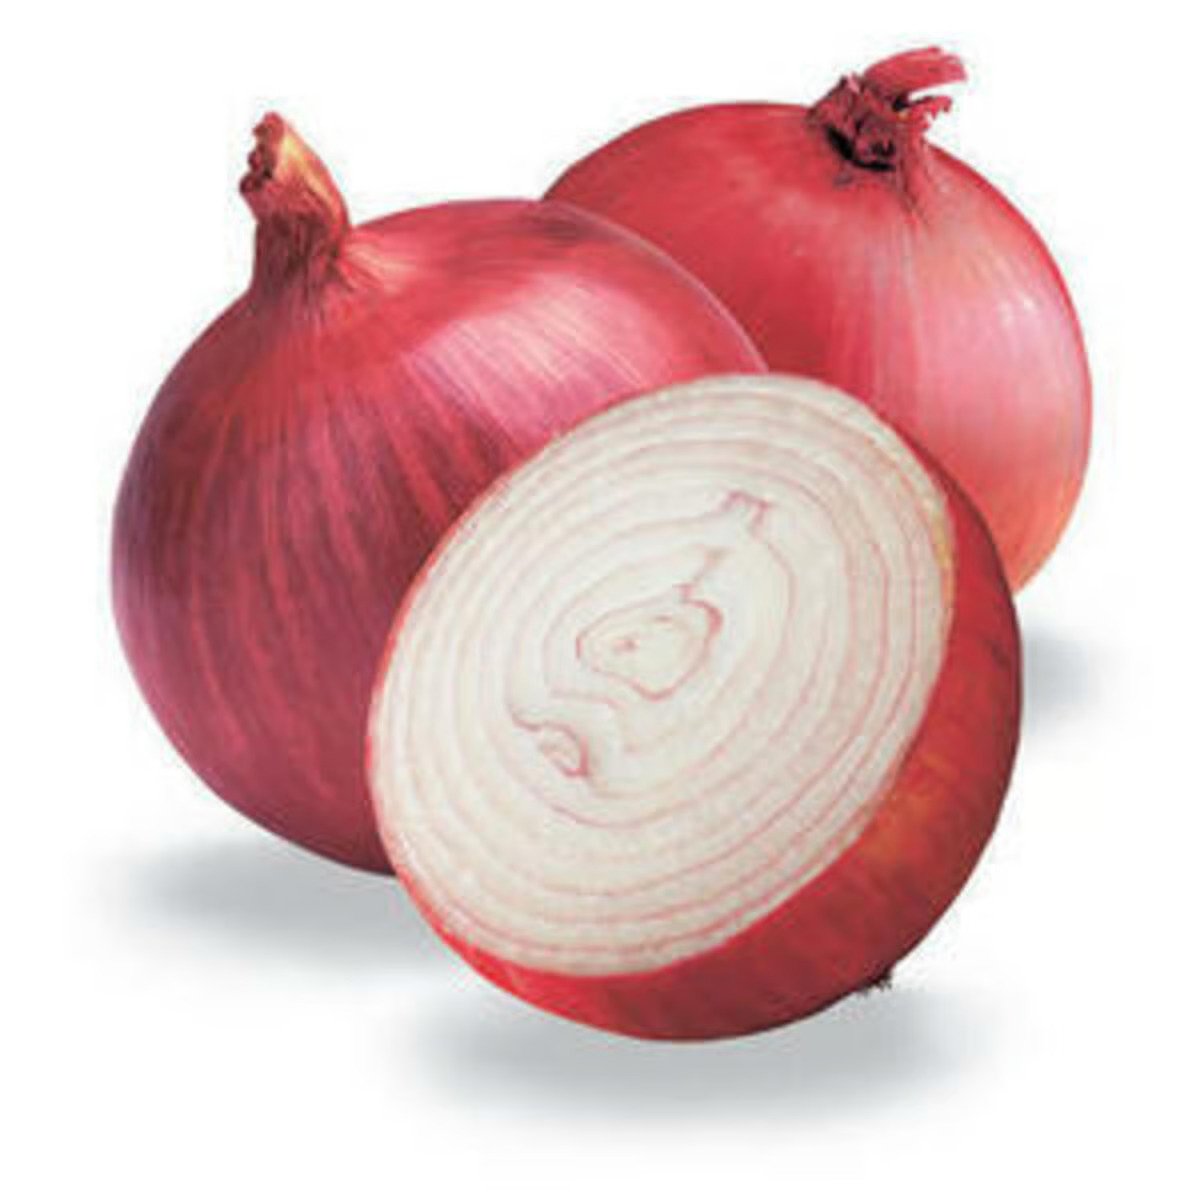 Onion Red Big 1kg Approx Weight